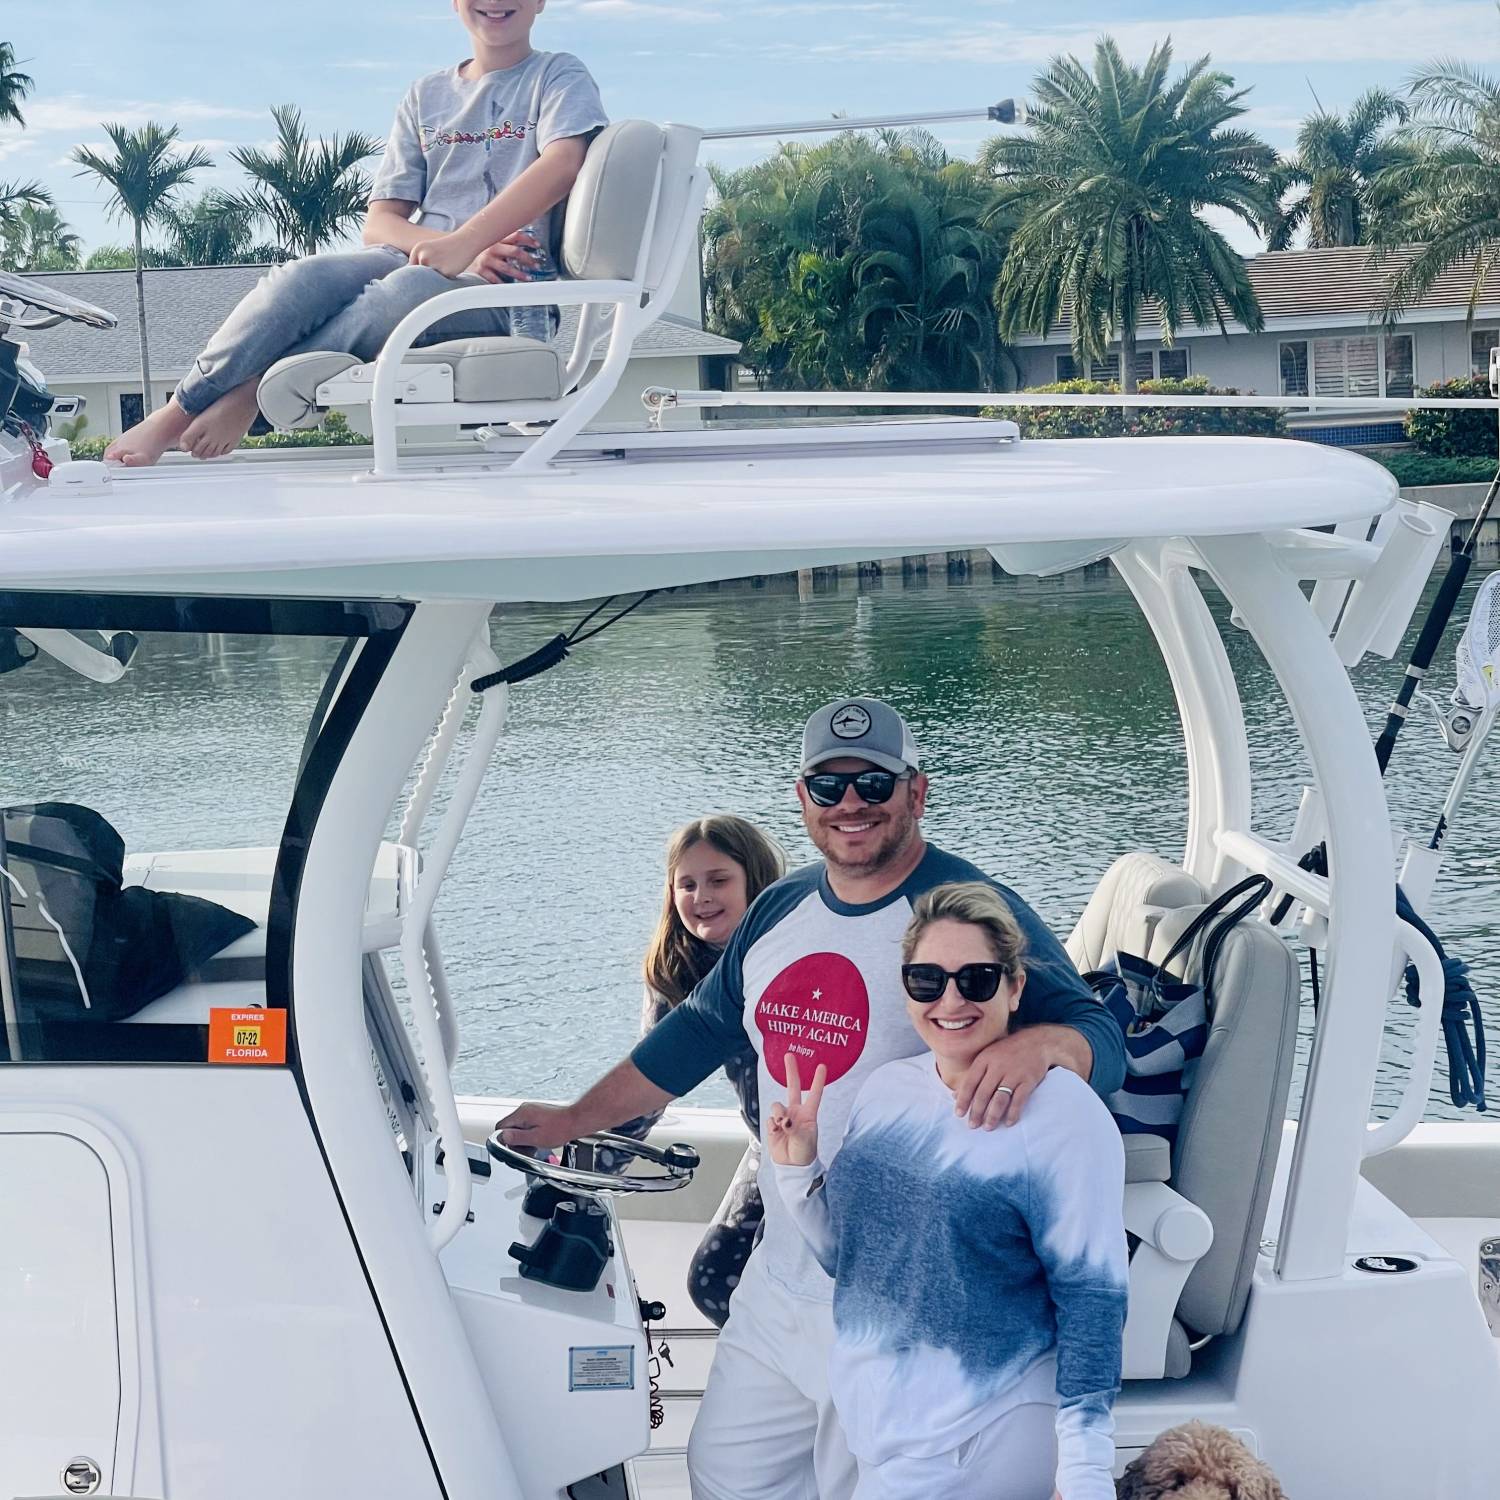 Title: Family Time - On board their Sportsman Open 302 Center Console - Location: Belleair Beach, Florida. Participating in the Photo Contest #SportsmanMarch2023